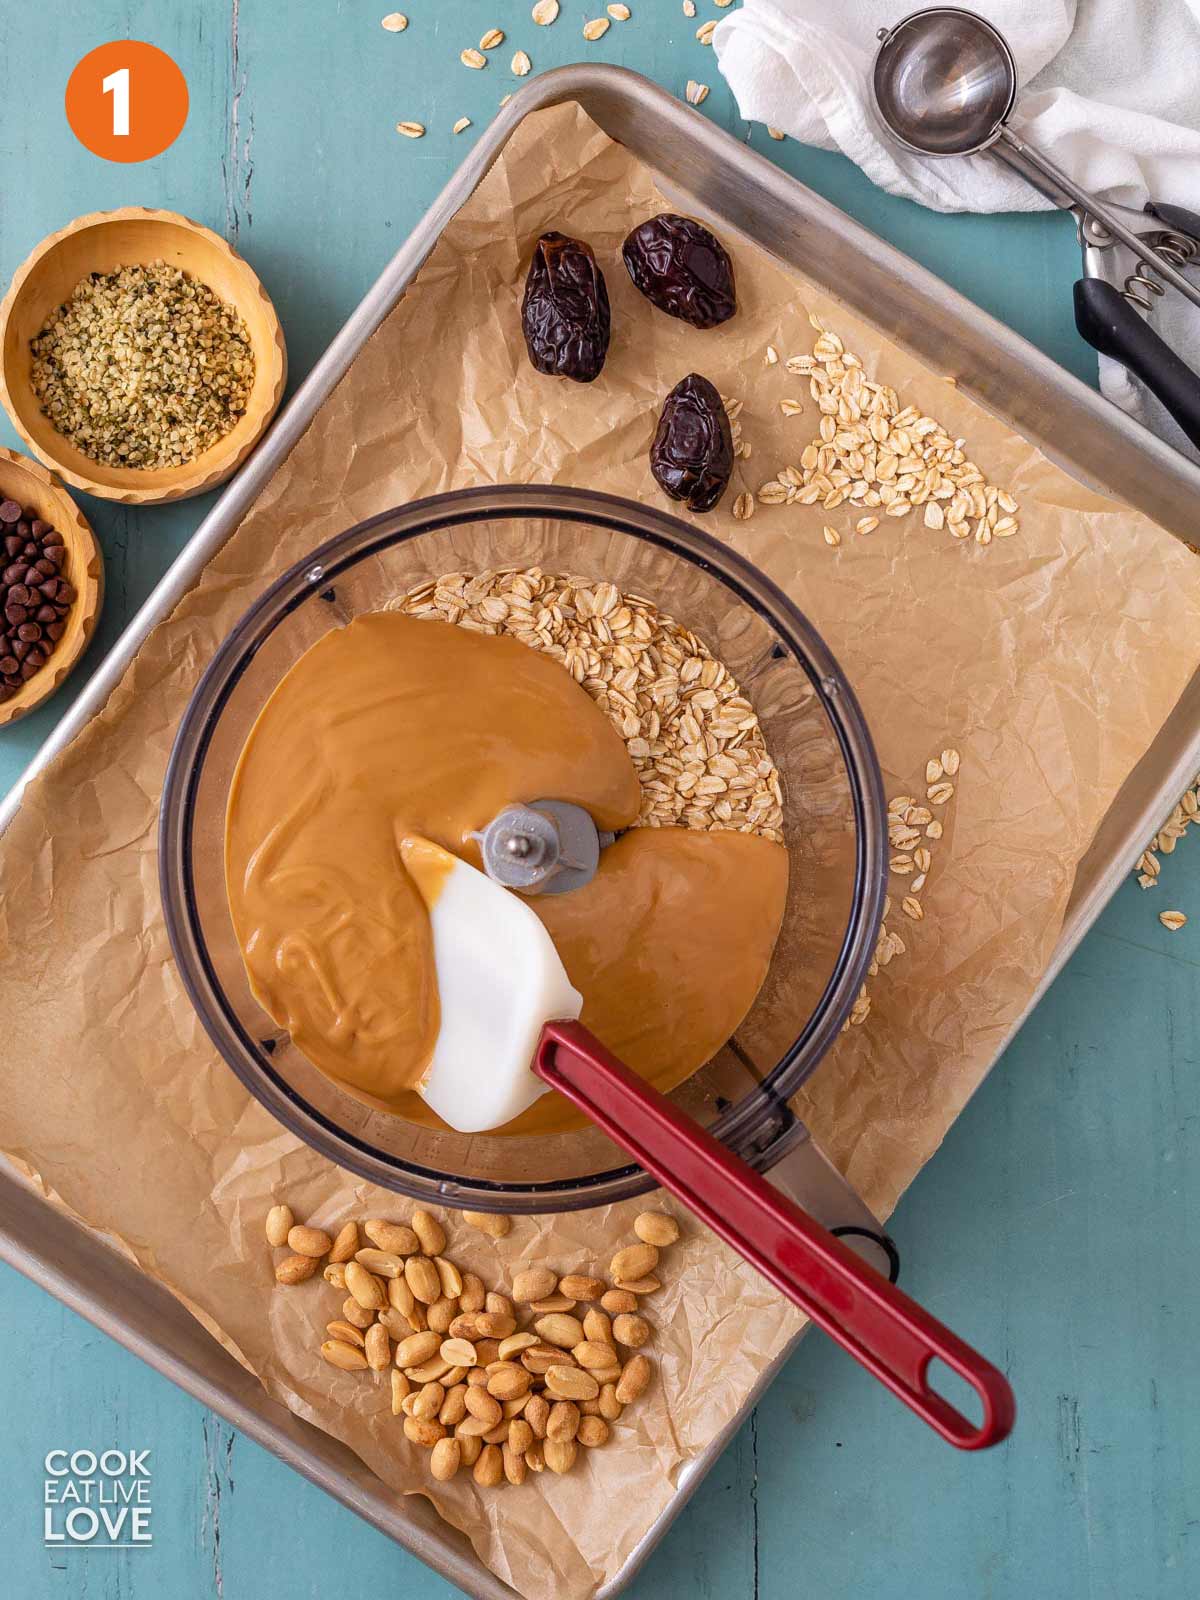 Peanut butter and oats in a food processor bowl.